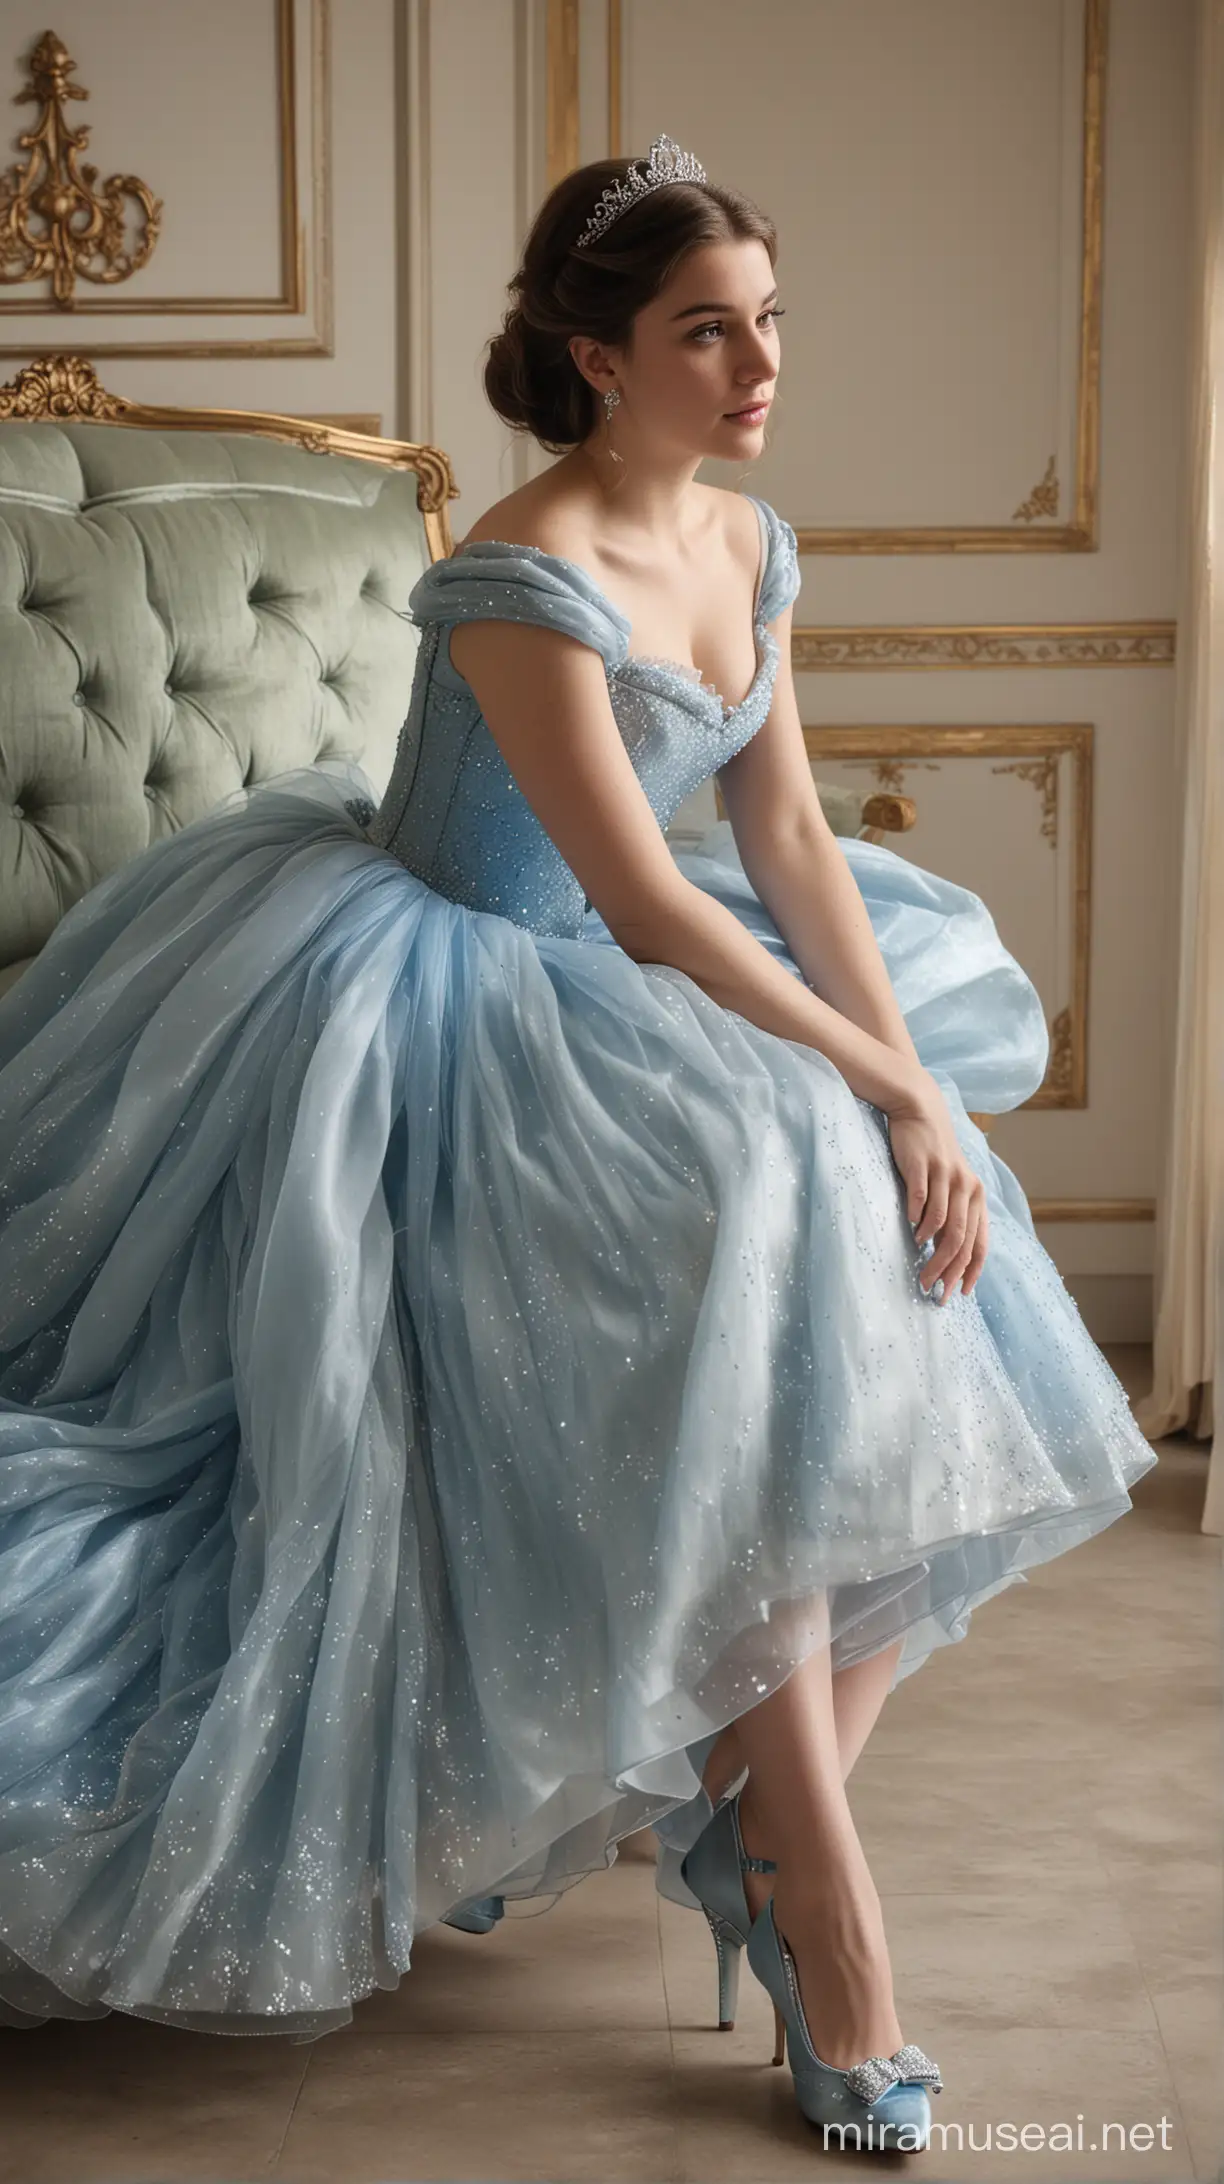 Elegant Woman in Cinderella Dress Poses in Cinematic Photography